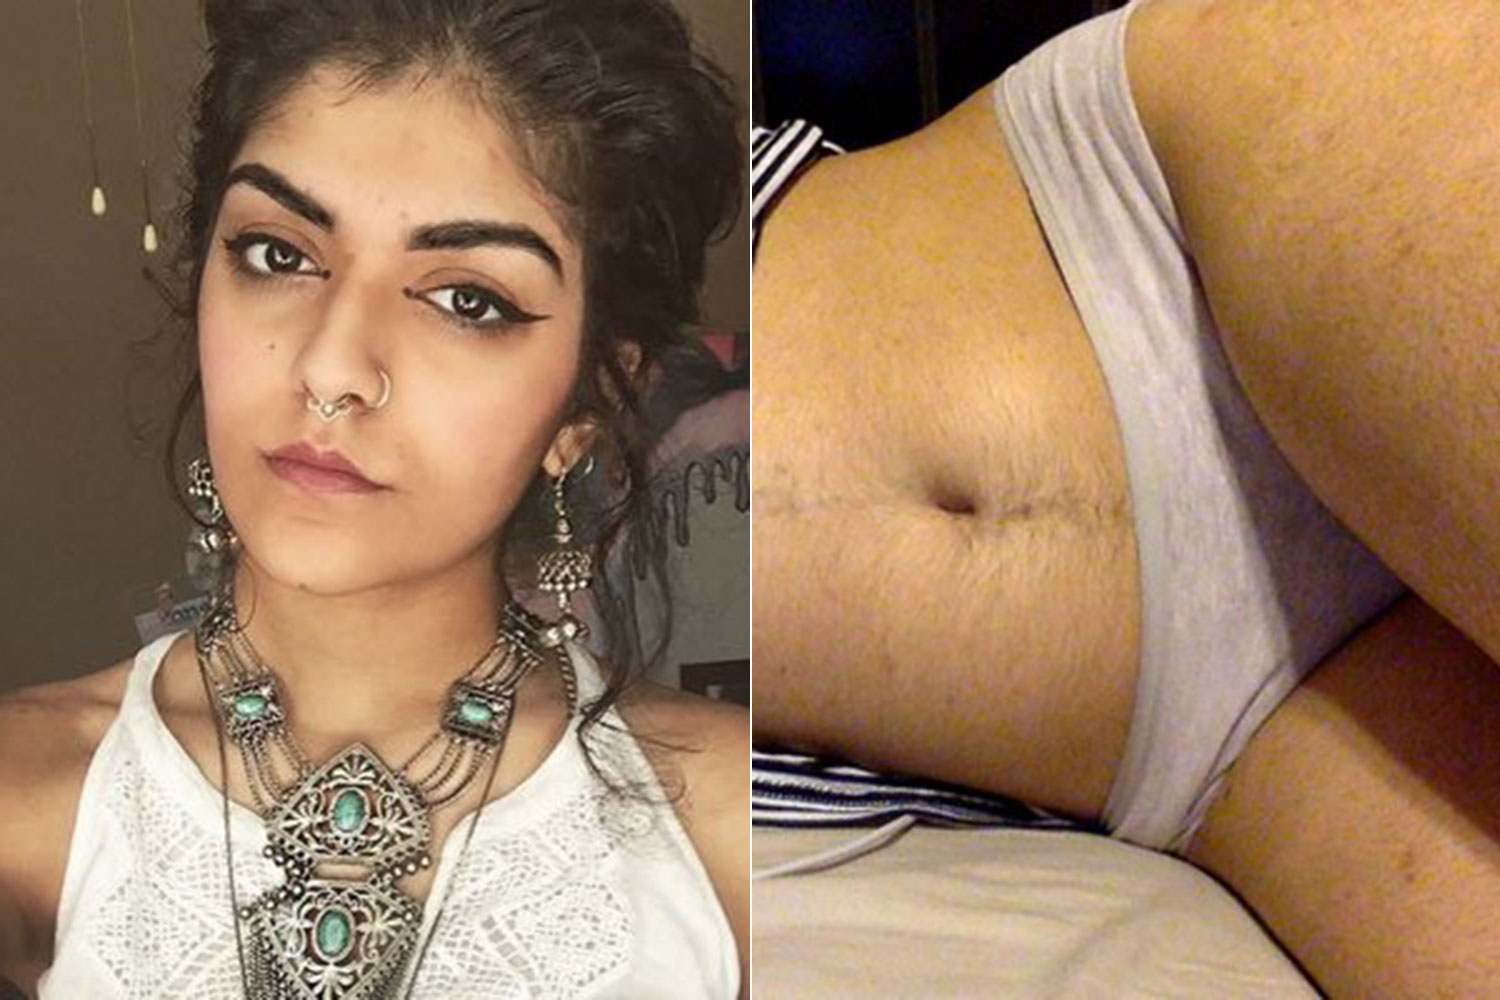 Woman shares pictures of her hairy stomach online and shuts down body shame...